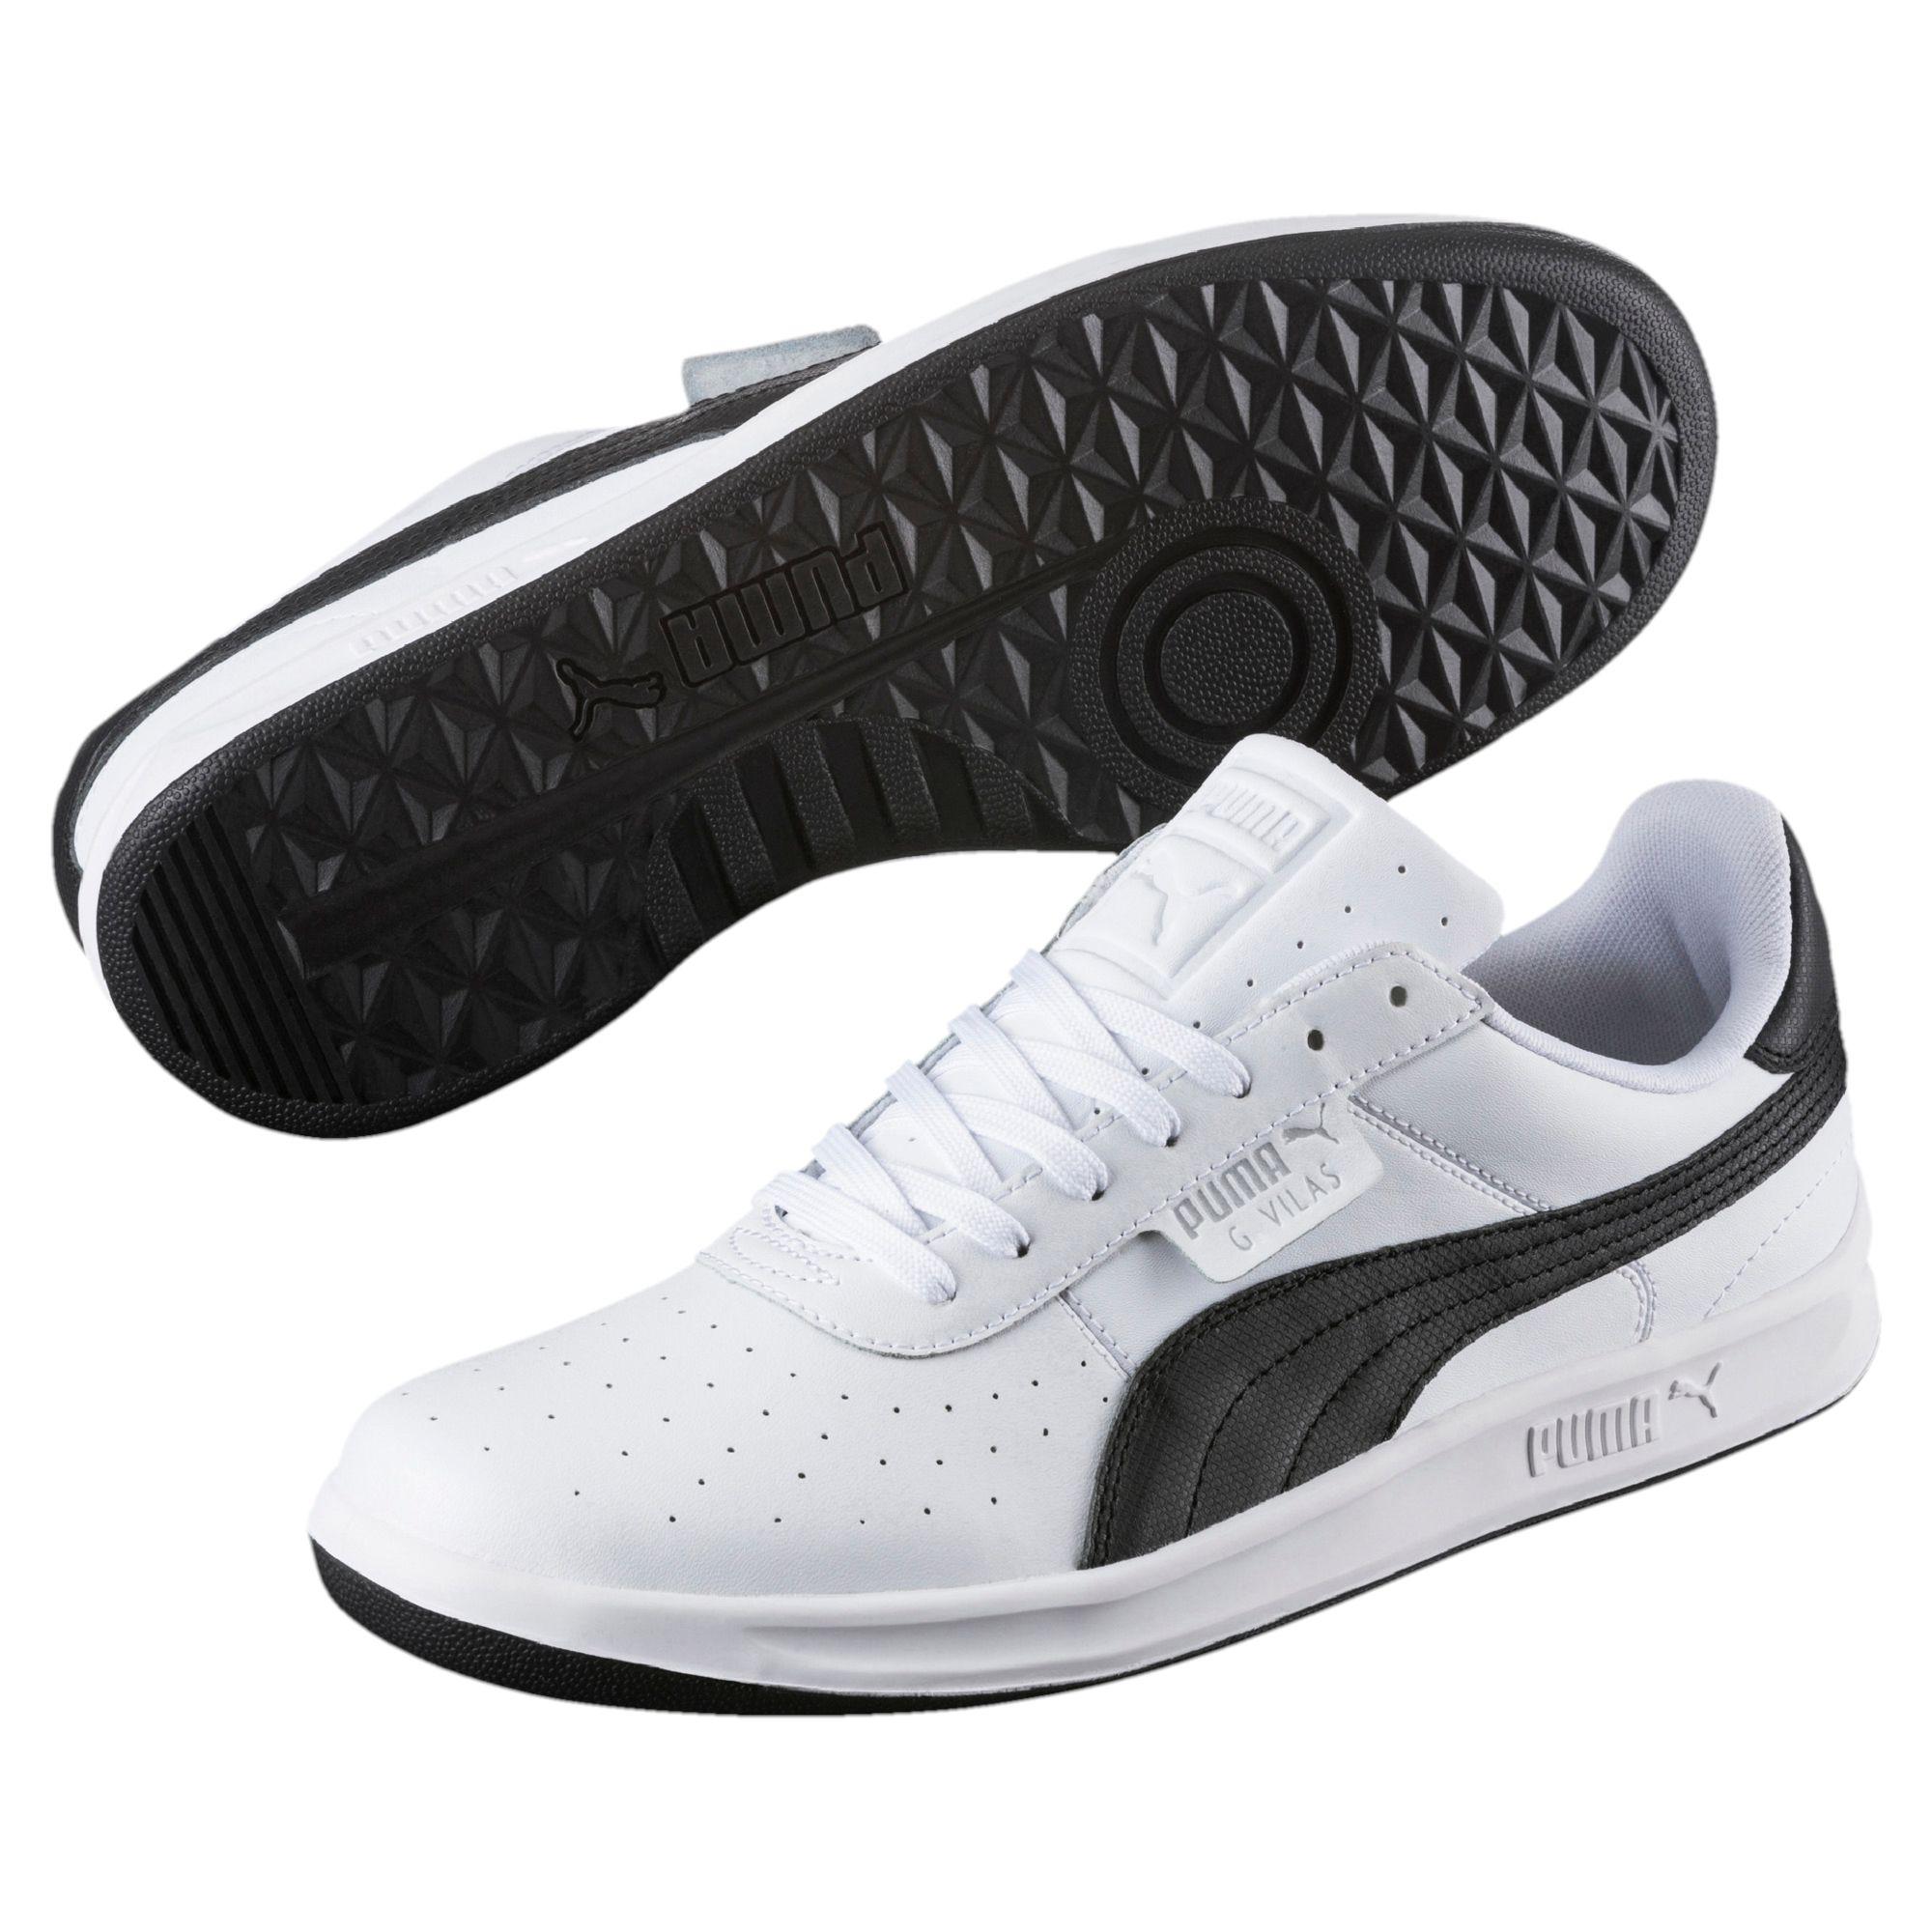 PUMA Leather G. Vilas 2 Men's Sneakers in White for Men - Lyst